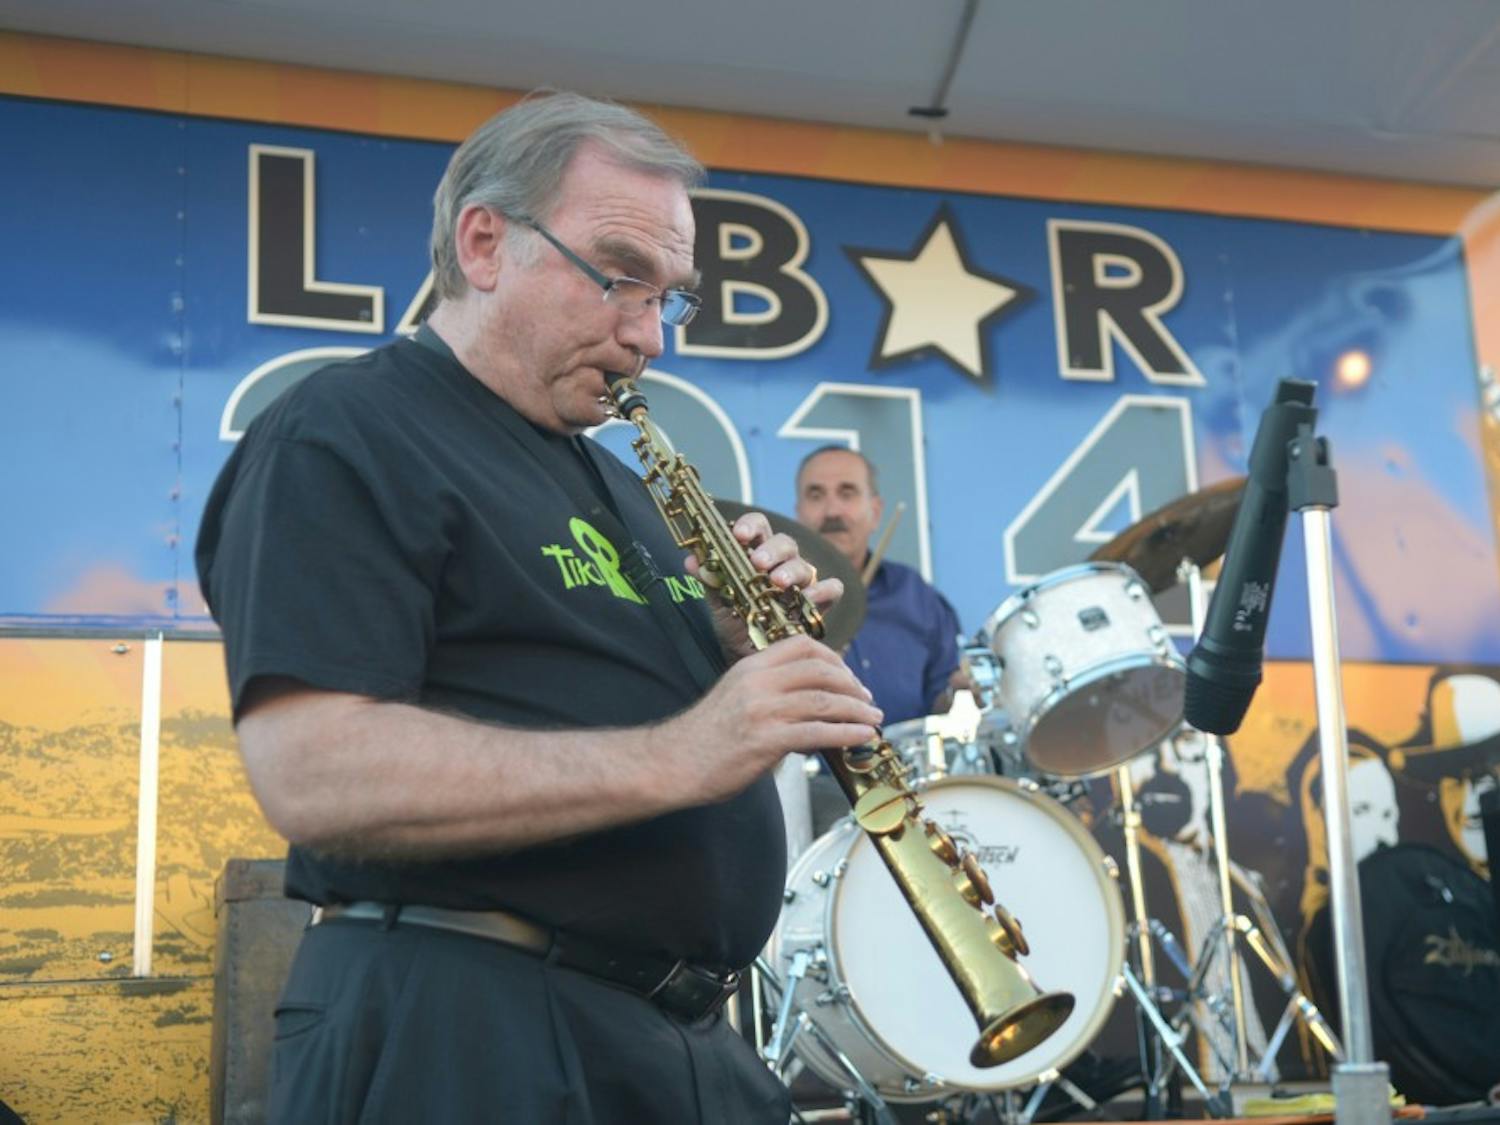 New Mexico Attorney General Gary King plays a saxophone during a Labor Day Event at Tractor Brewing in Downtown Albuquerque on Sept. 1, 2014. King, a Democrat, is running against incumbent Gov. Susana Martinez in the upcoming election.